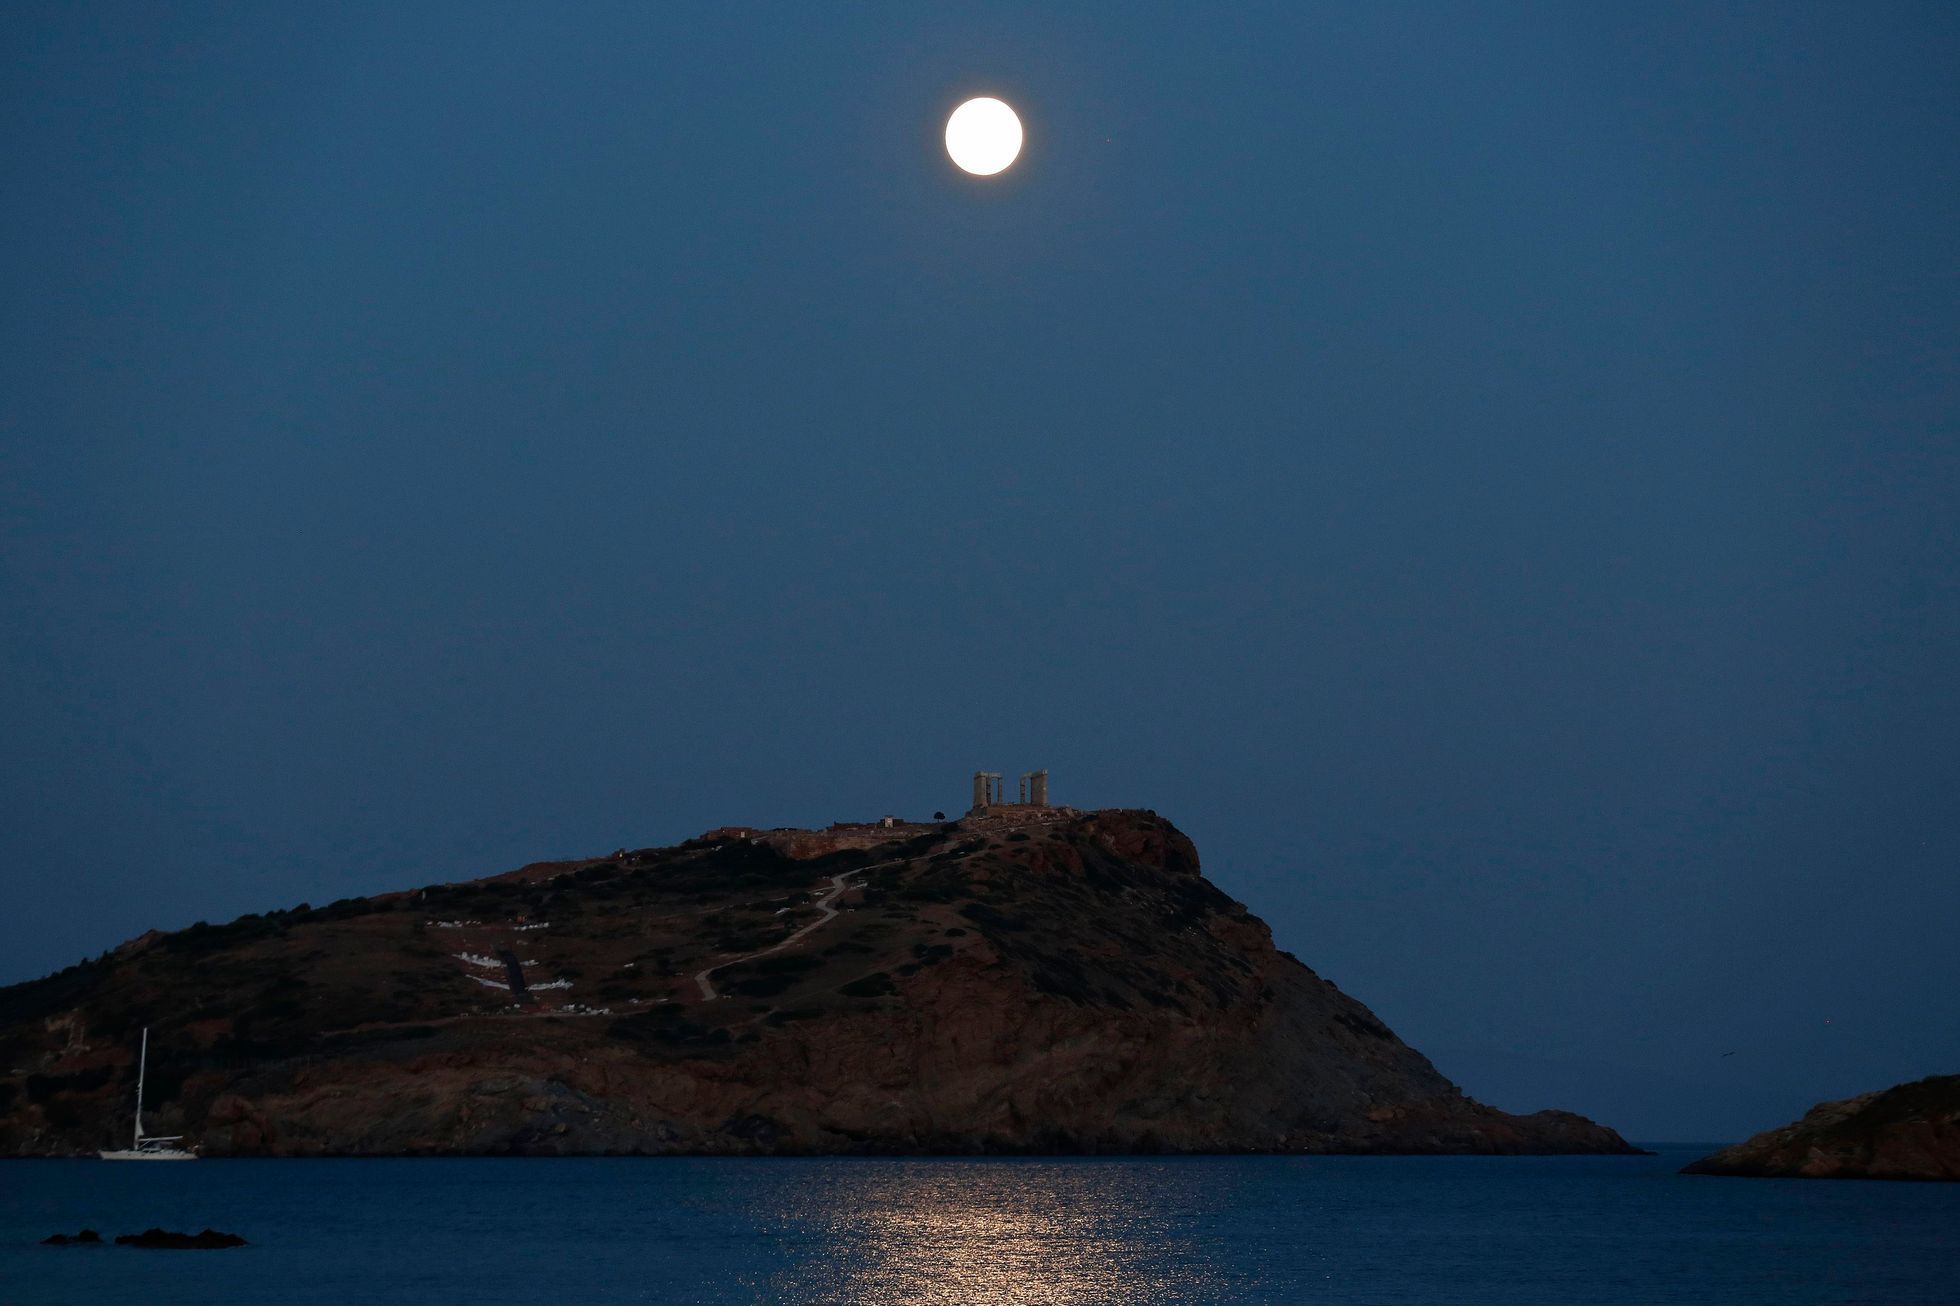 The supermoon rises over the Temple of Poseidon in Cape Sounion, east of Athens